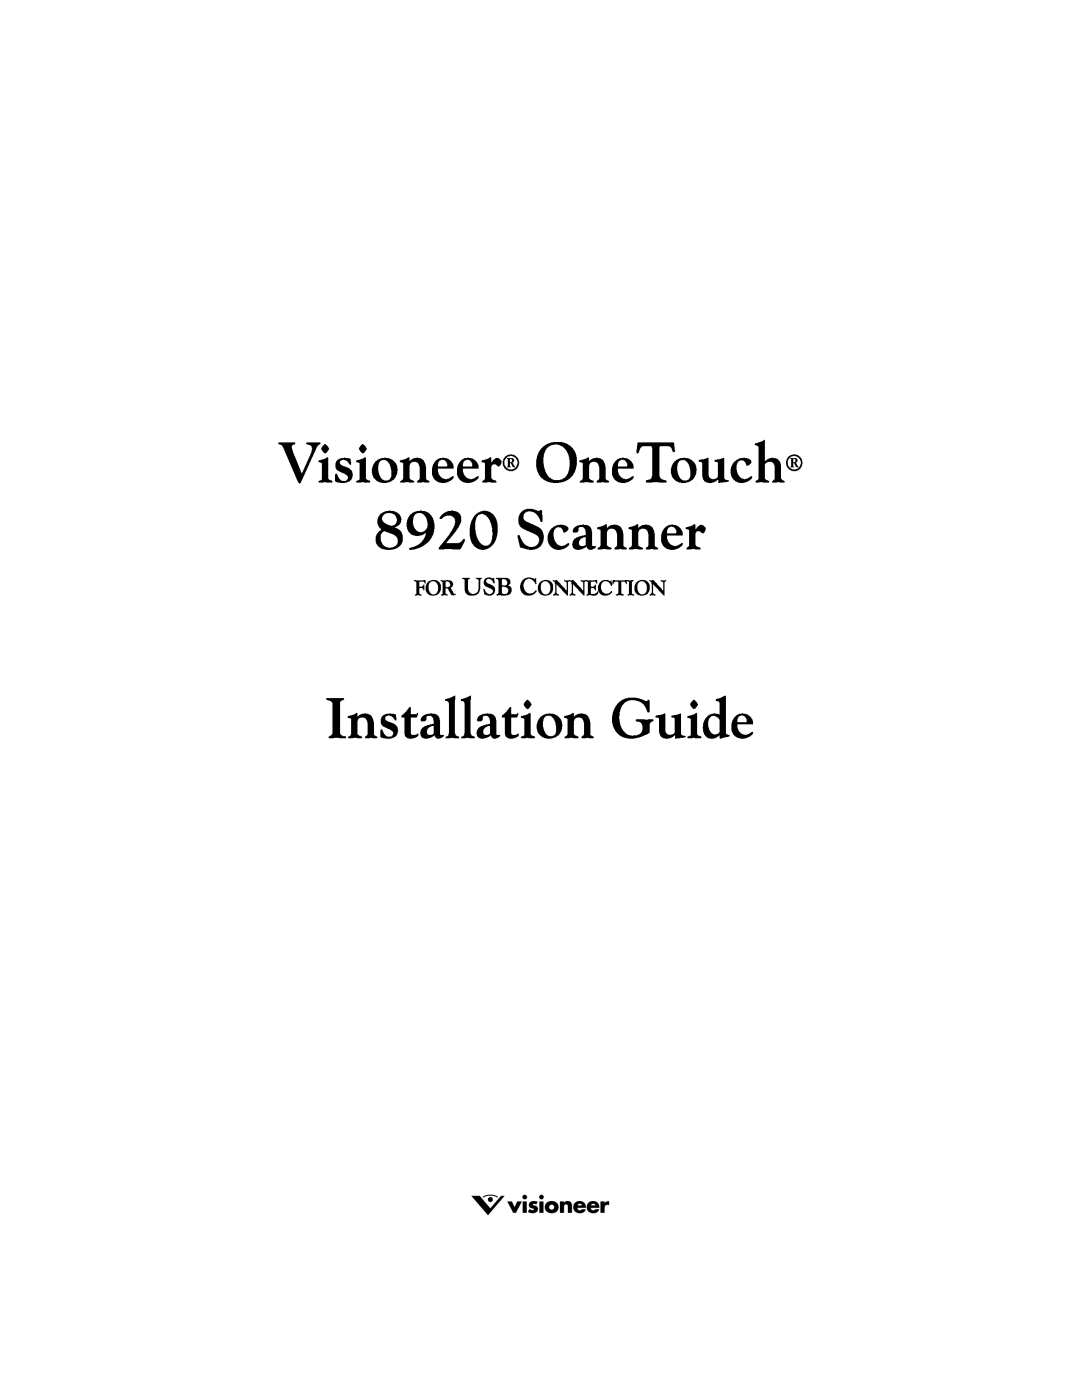 Visioneer manual Visioneer OneTouch 8920 Scanner, Installation Guide, For Usb Connection 